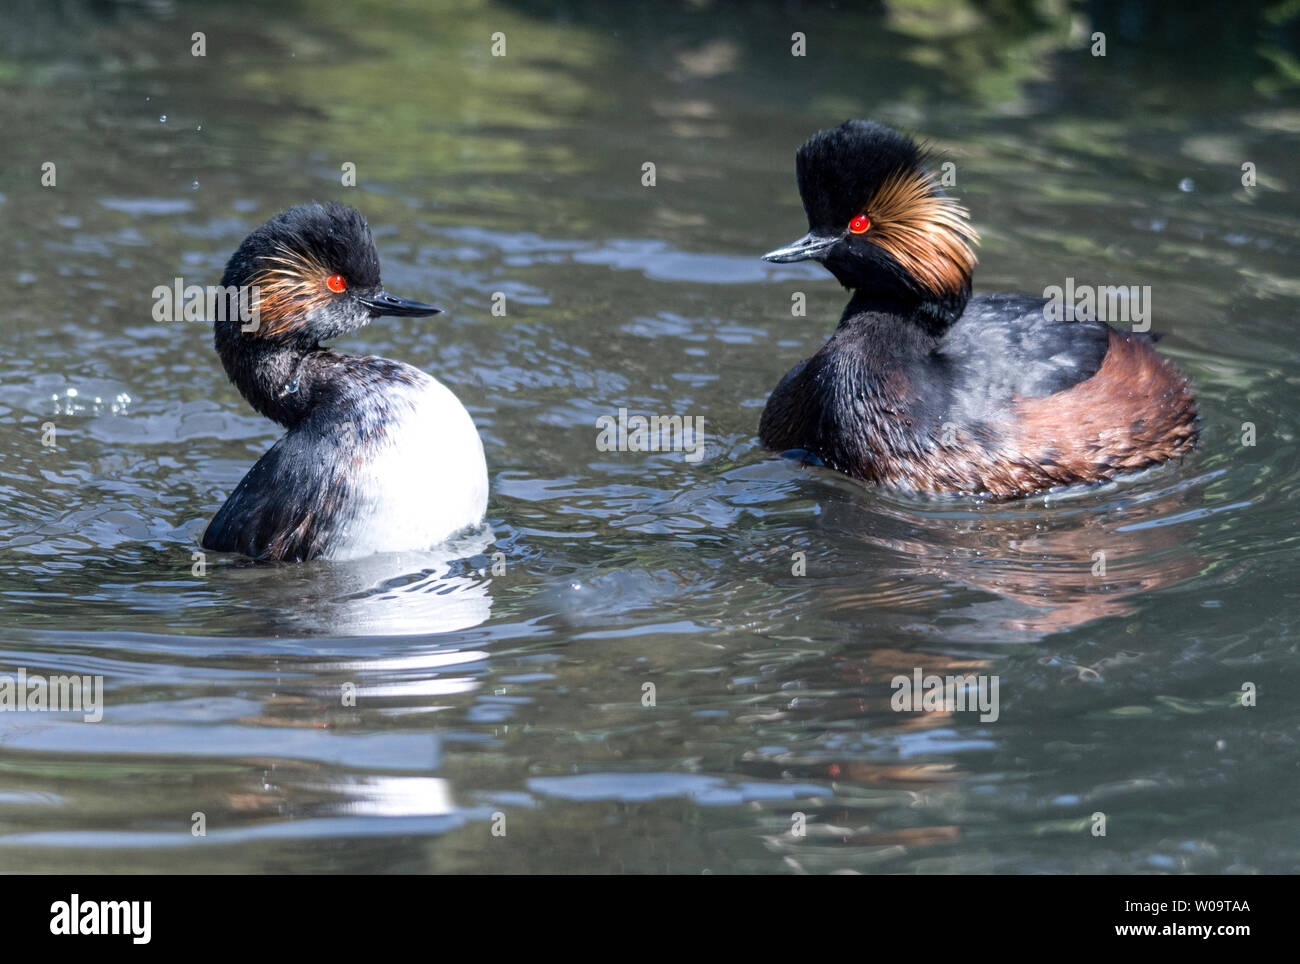 Black-necked Grebe (Podiceps nigricollis).Pair of adults, in breeding plumage, in courtship display. Stock Photo